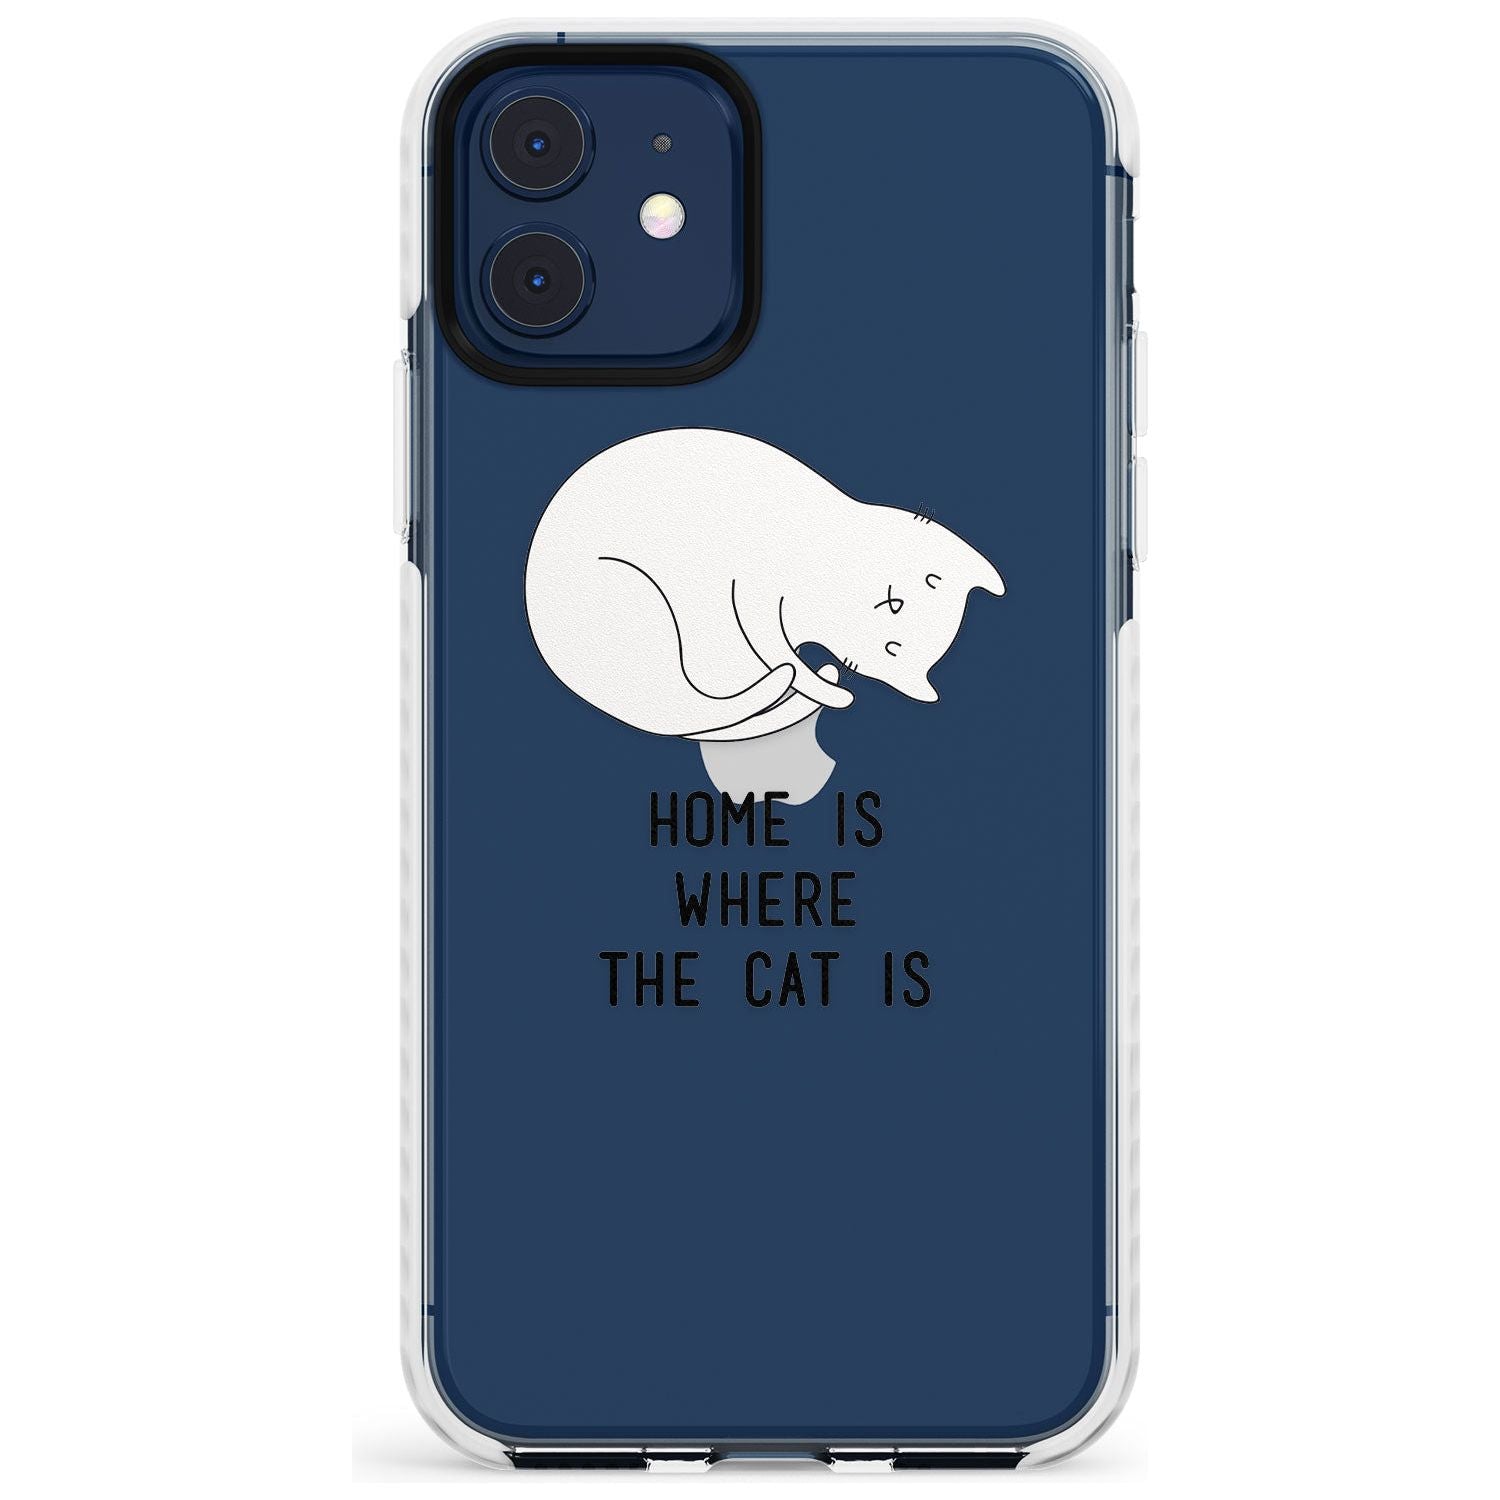 Home Is Where the Cat is Slim TPU Phone Case for iPhone 11